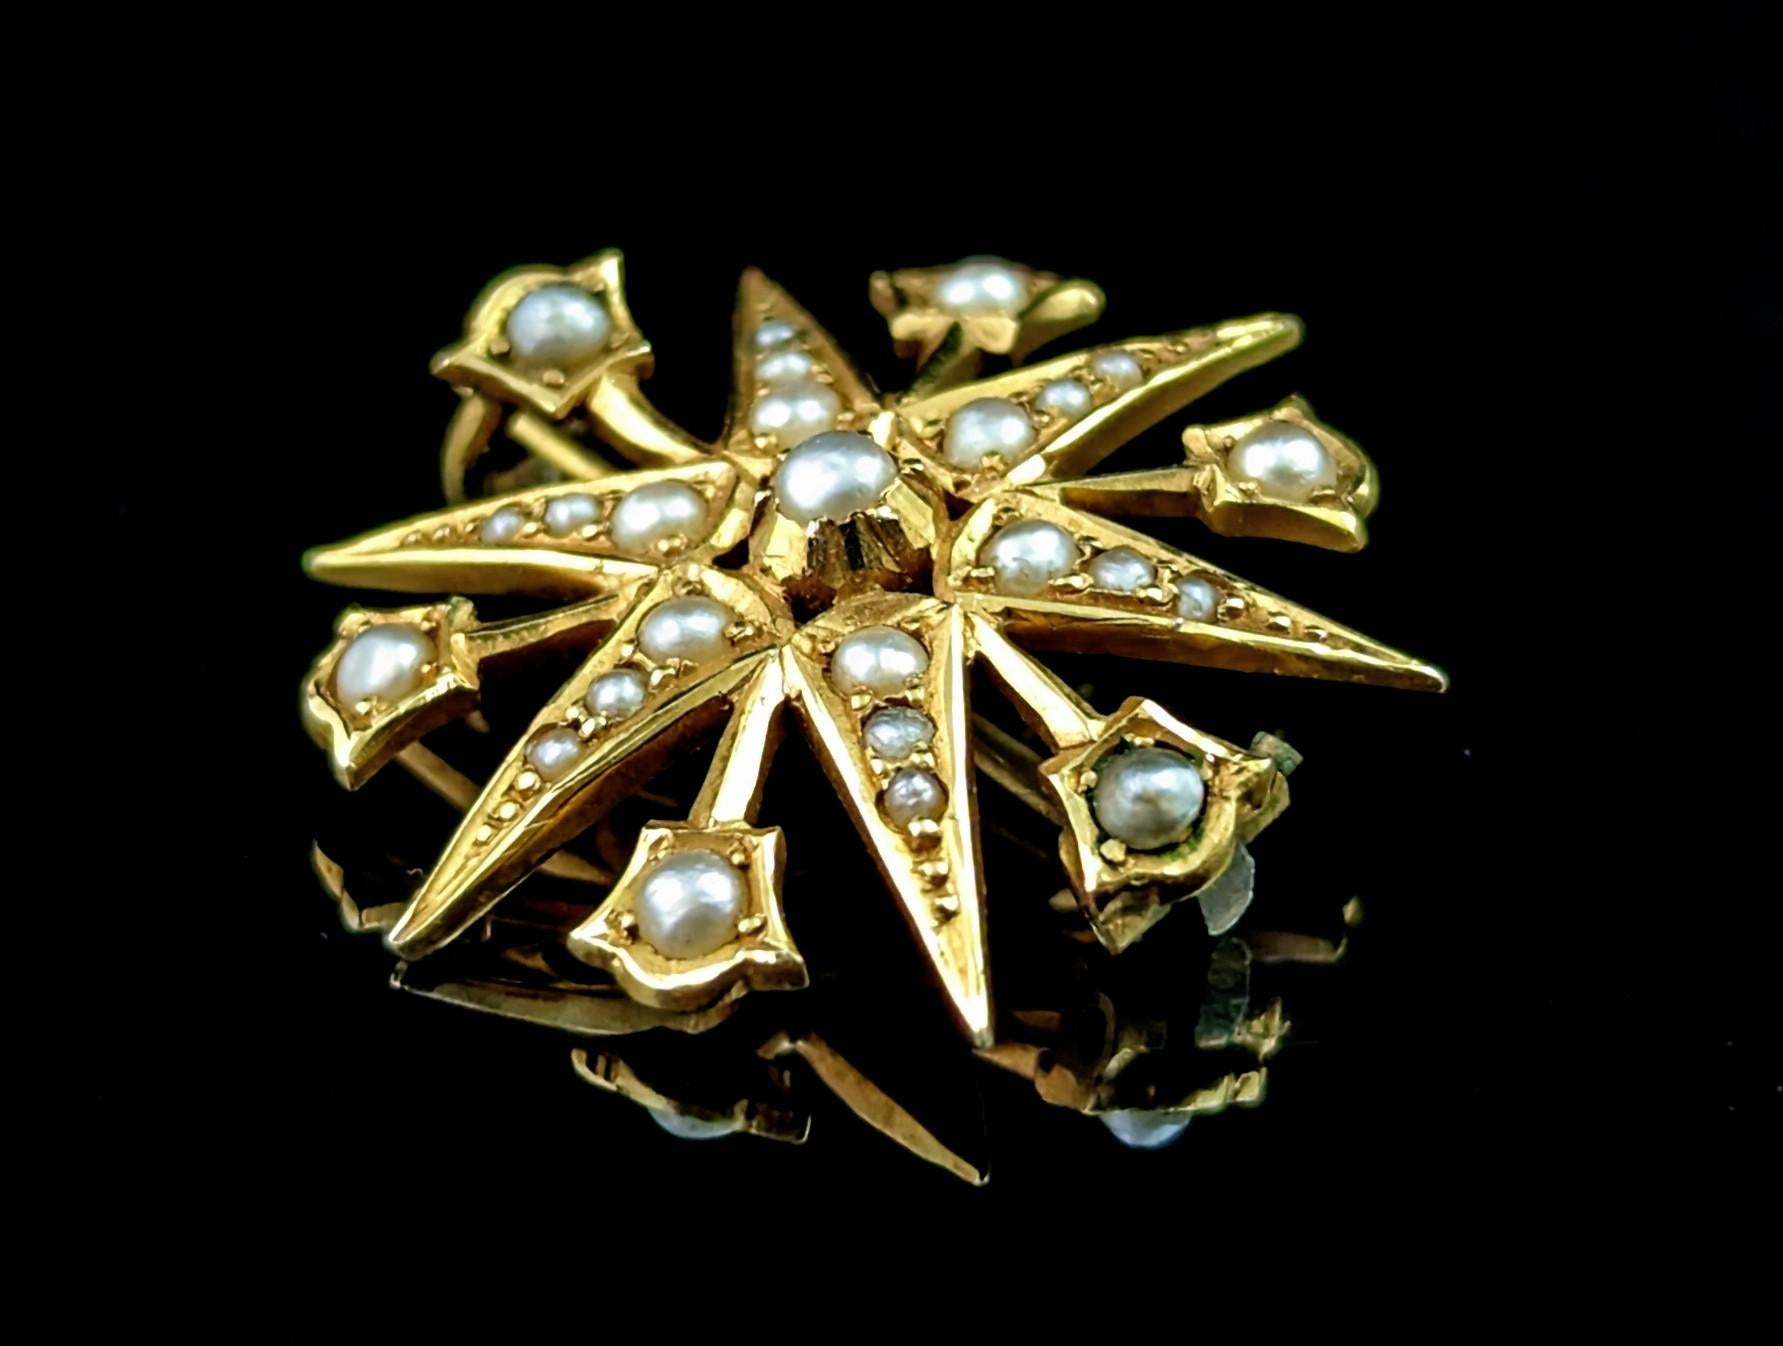 Cabochon Antique Star brooch, 15k yellow gold, Pearl, Starburst 